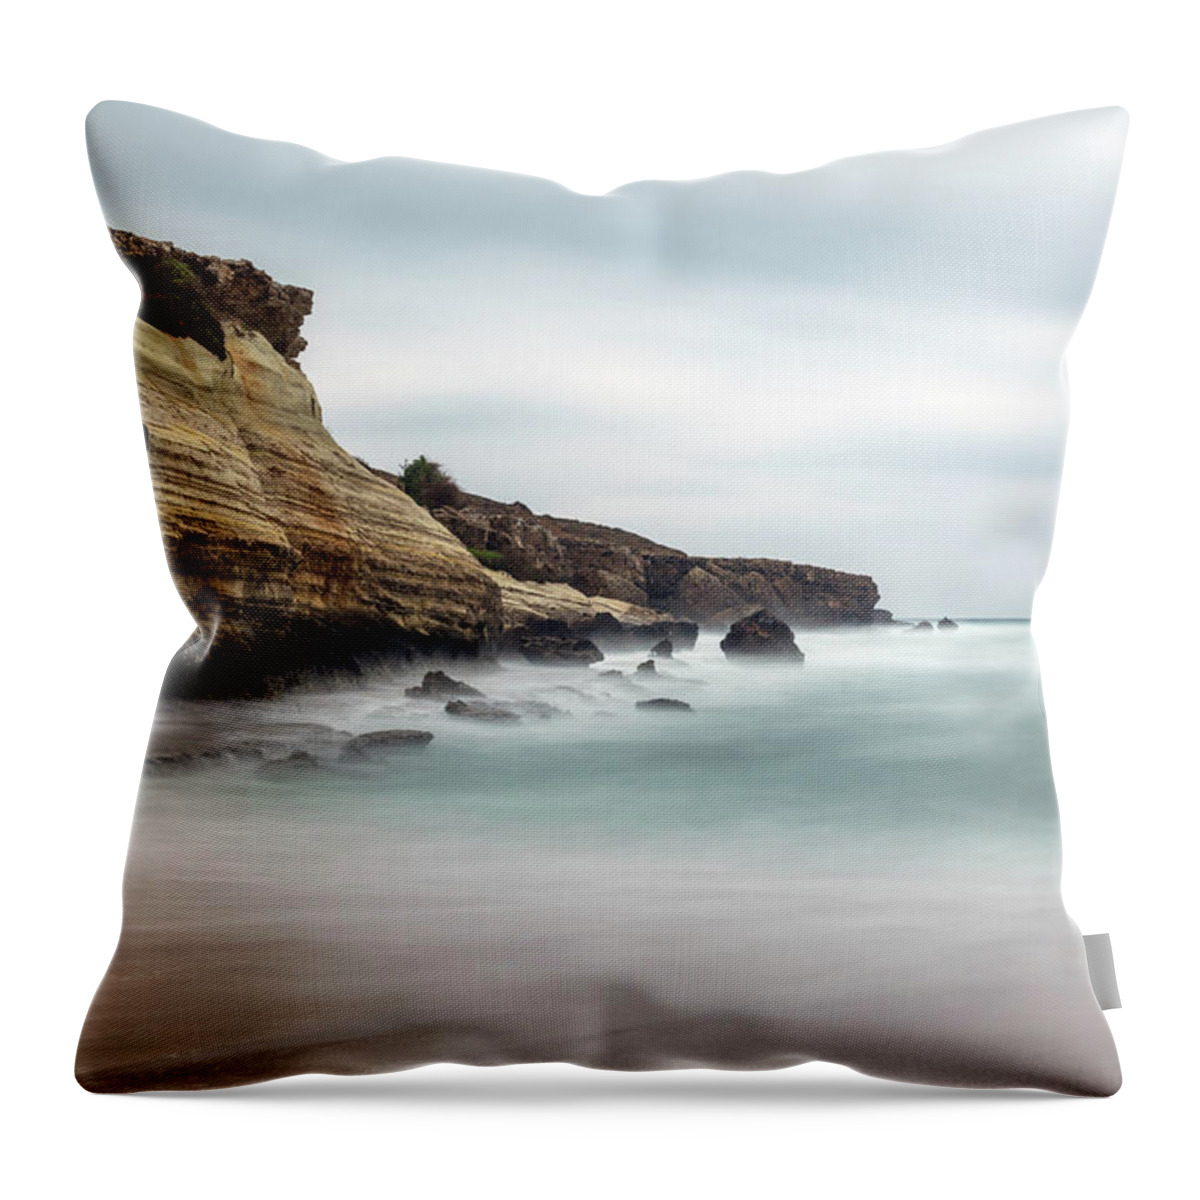 Sand Throw Pillow featuring the photograph Milky Summer by Stelios Kleanthous